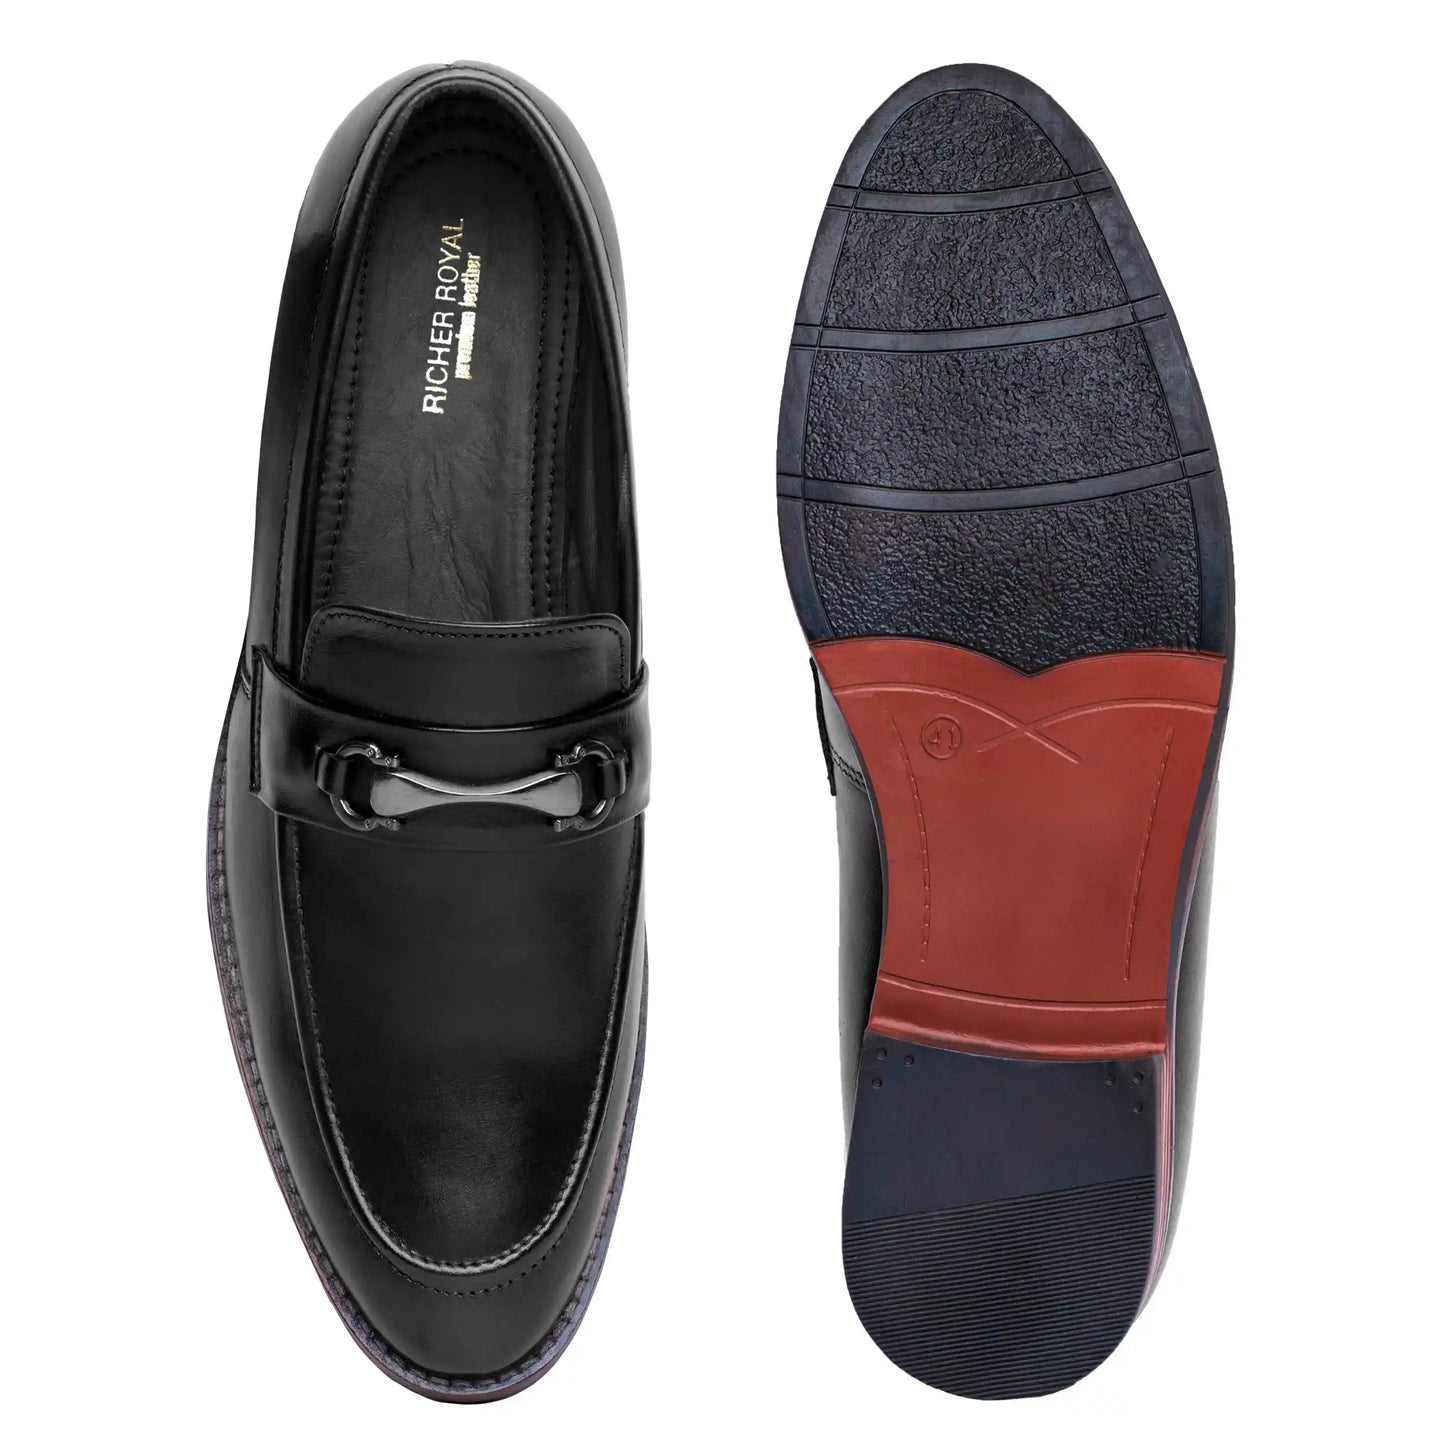 Bit Loafers for Men Pure Leather Slip On Shoes